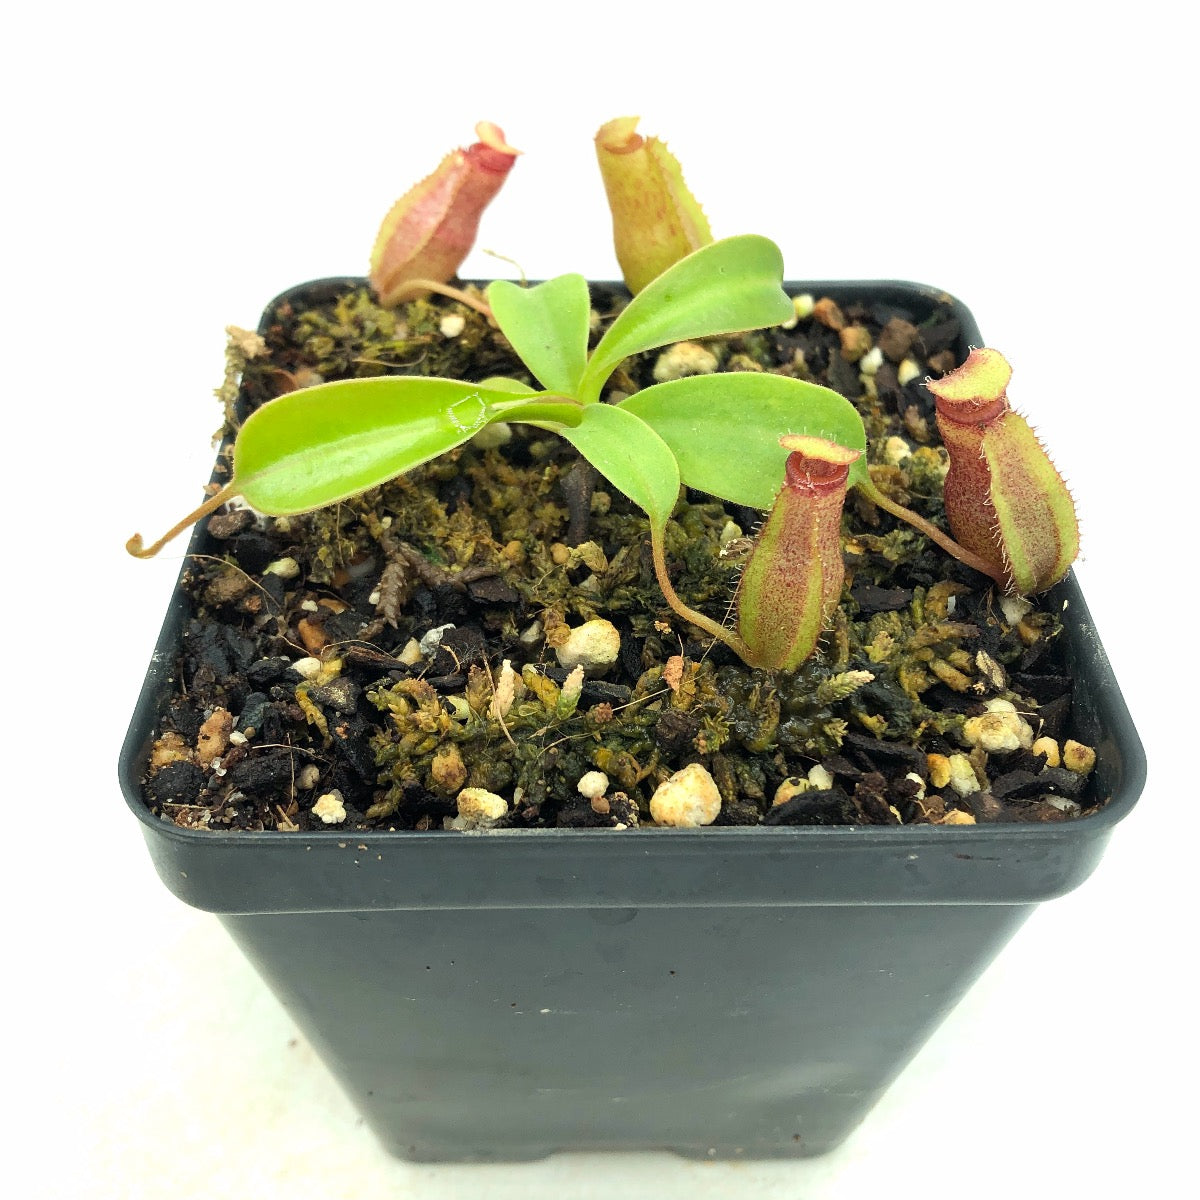 Nepenthes "Sabre" (ventricosa x trusmadiensis) Seed Grown